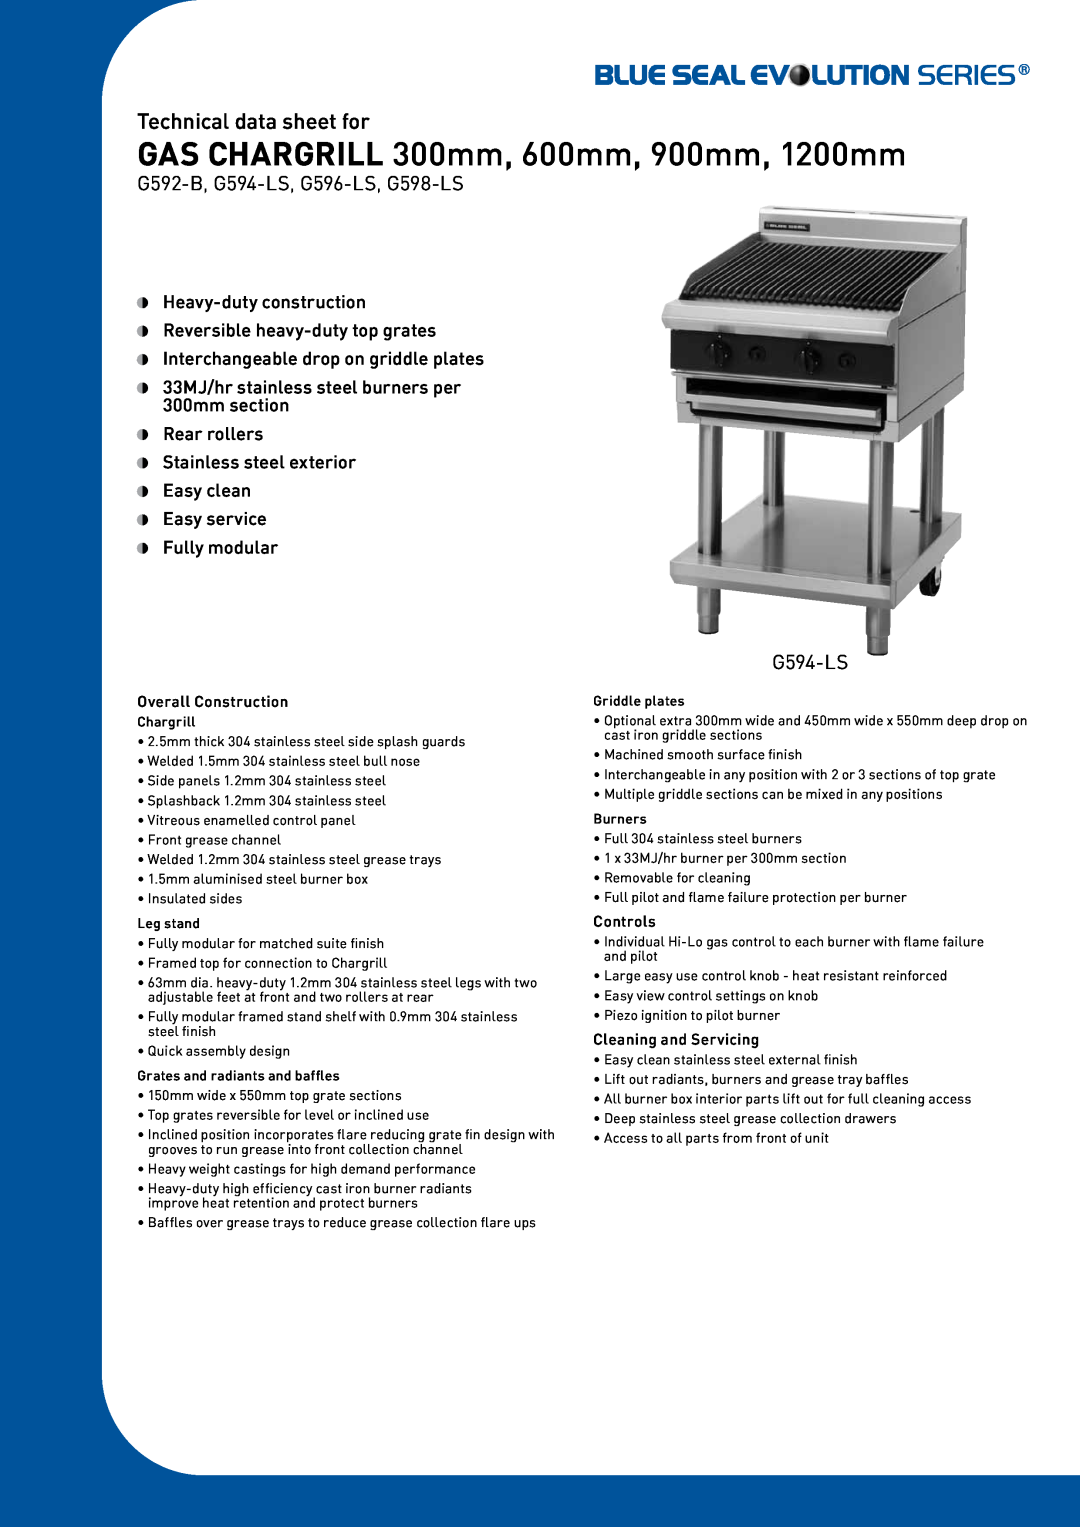 Moffat G592-B manual GAS CHARGRILL 300mm, 600mm, 900mm, 1200mm, Technical data sheet for, Overall Construction, Controls 